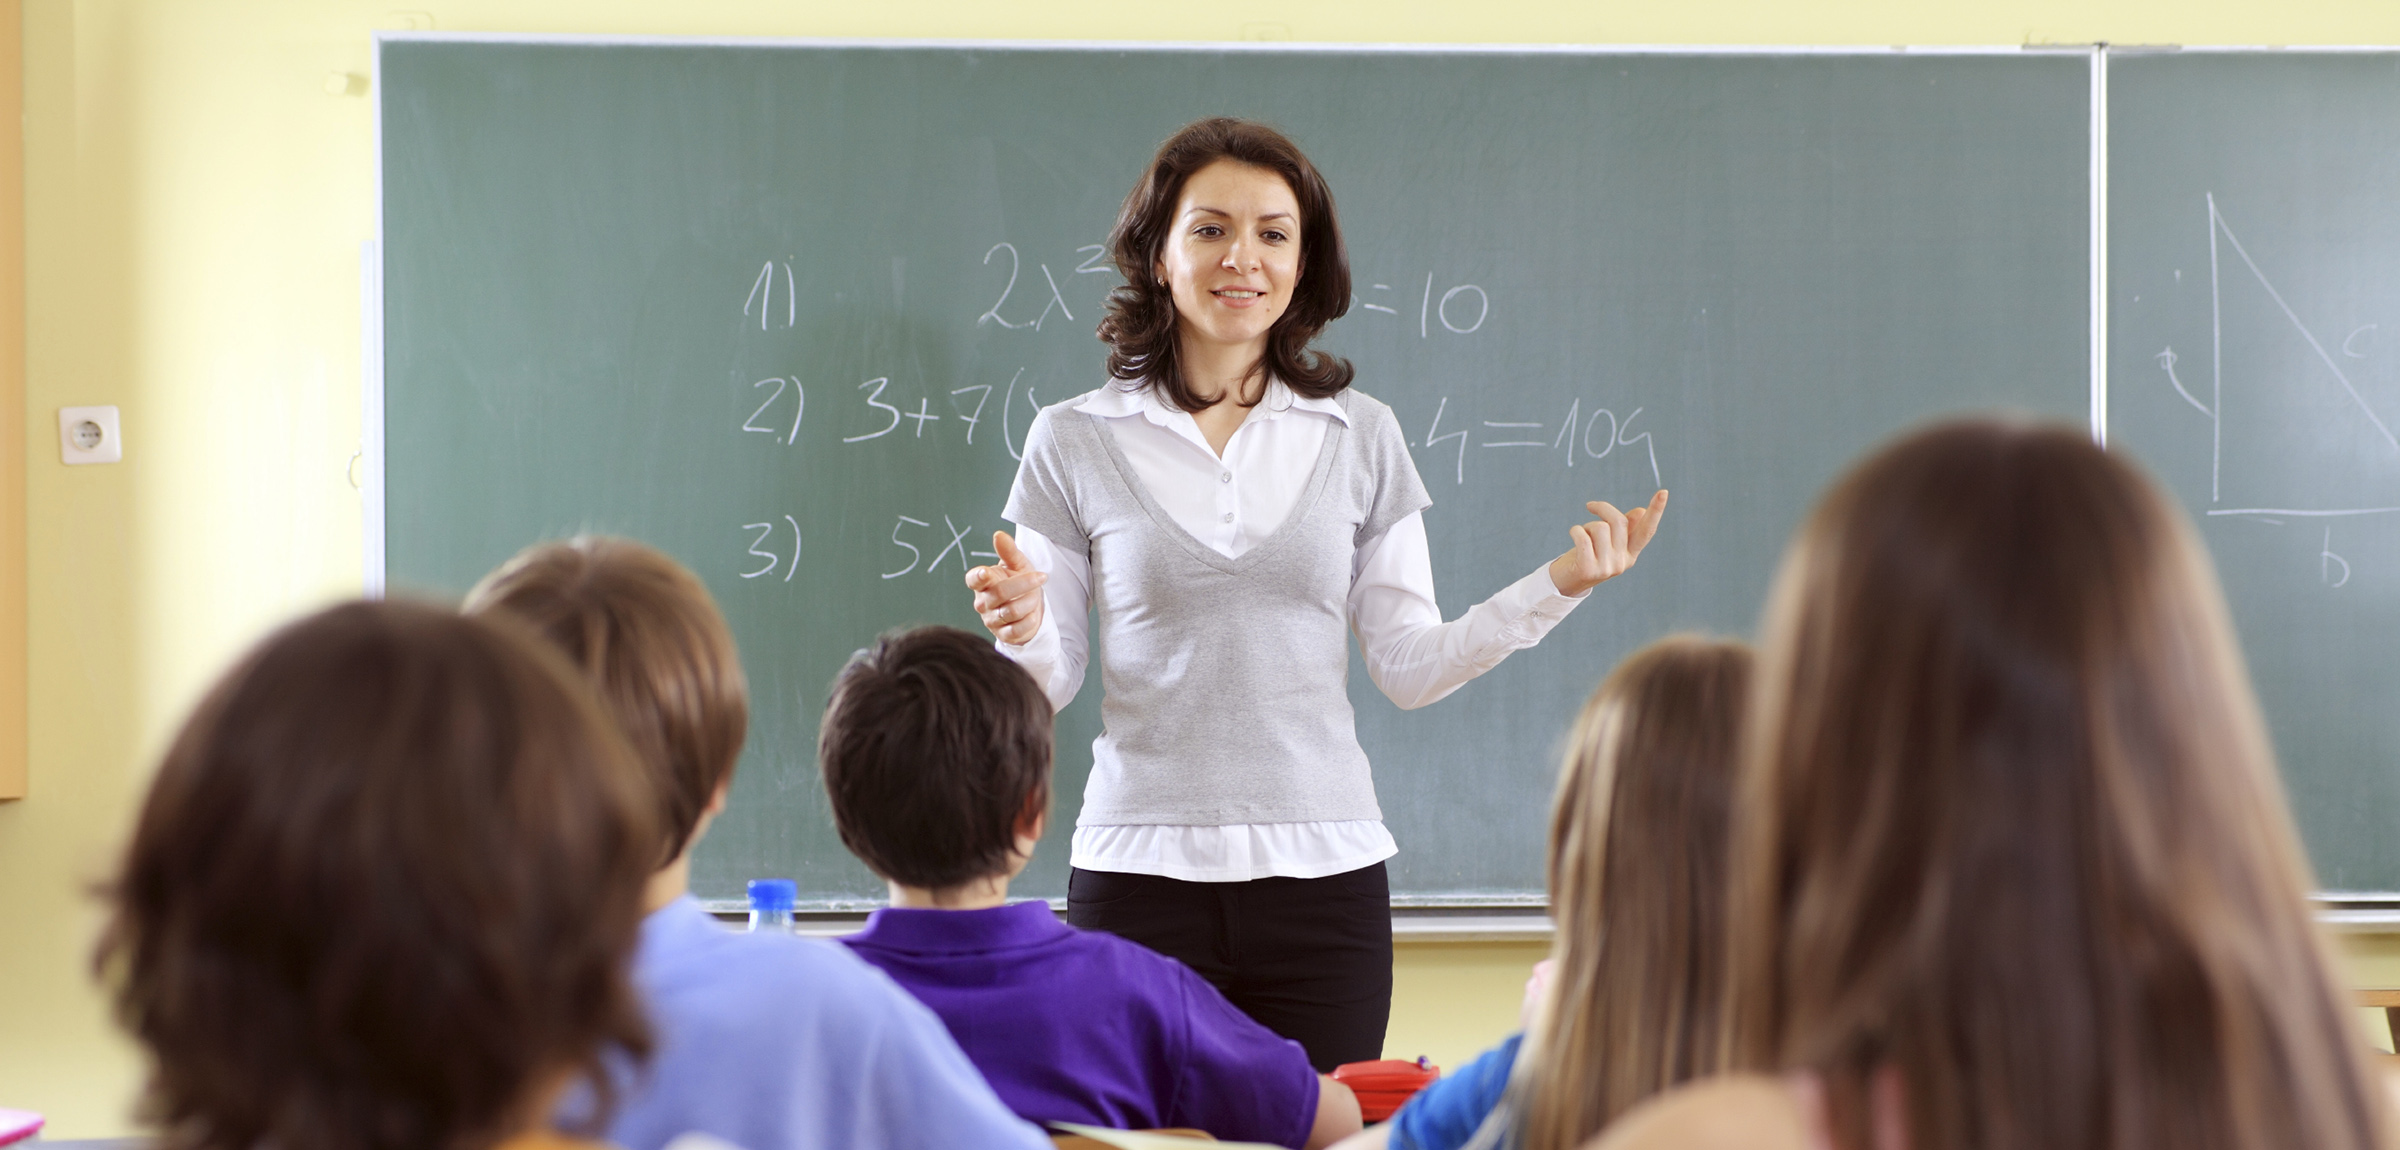 White female with brown hair standing in front of a chalkboard teaching students in the foreground 